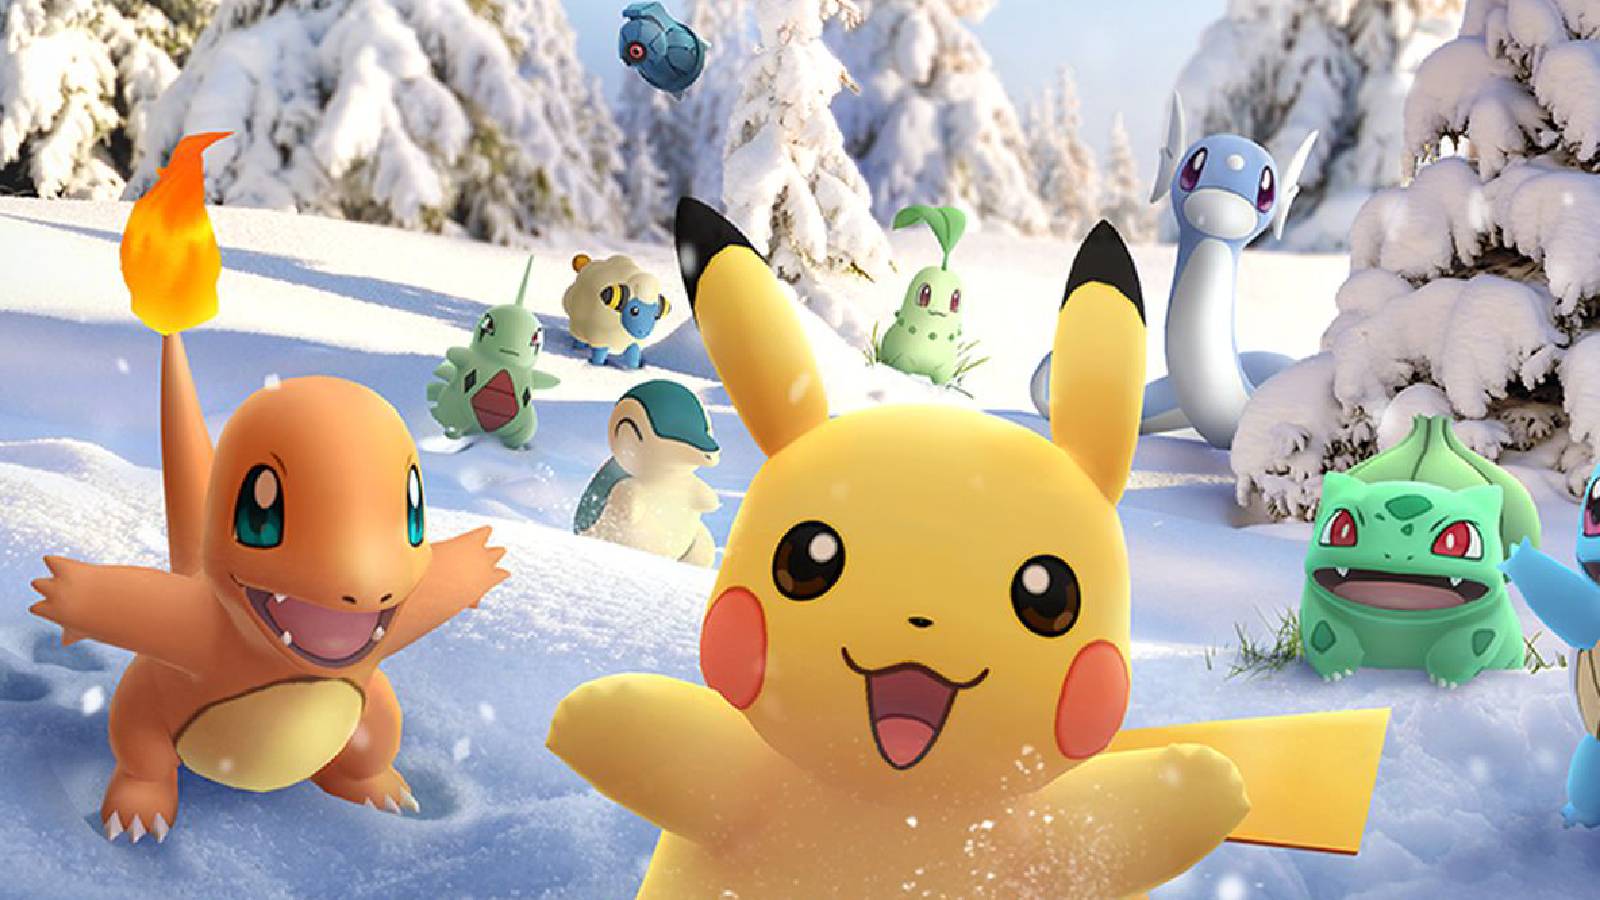 Pikachu and other Pokemon are stood in the snow, looking excited